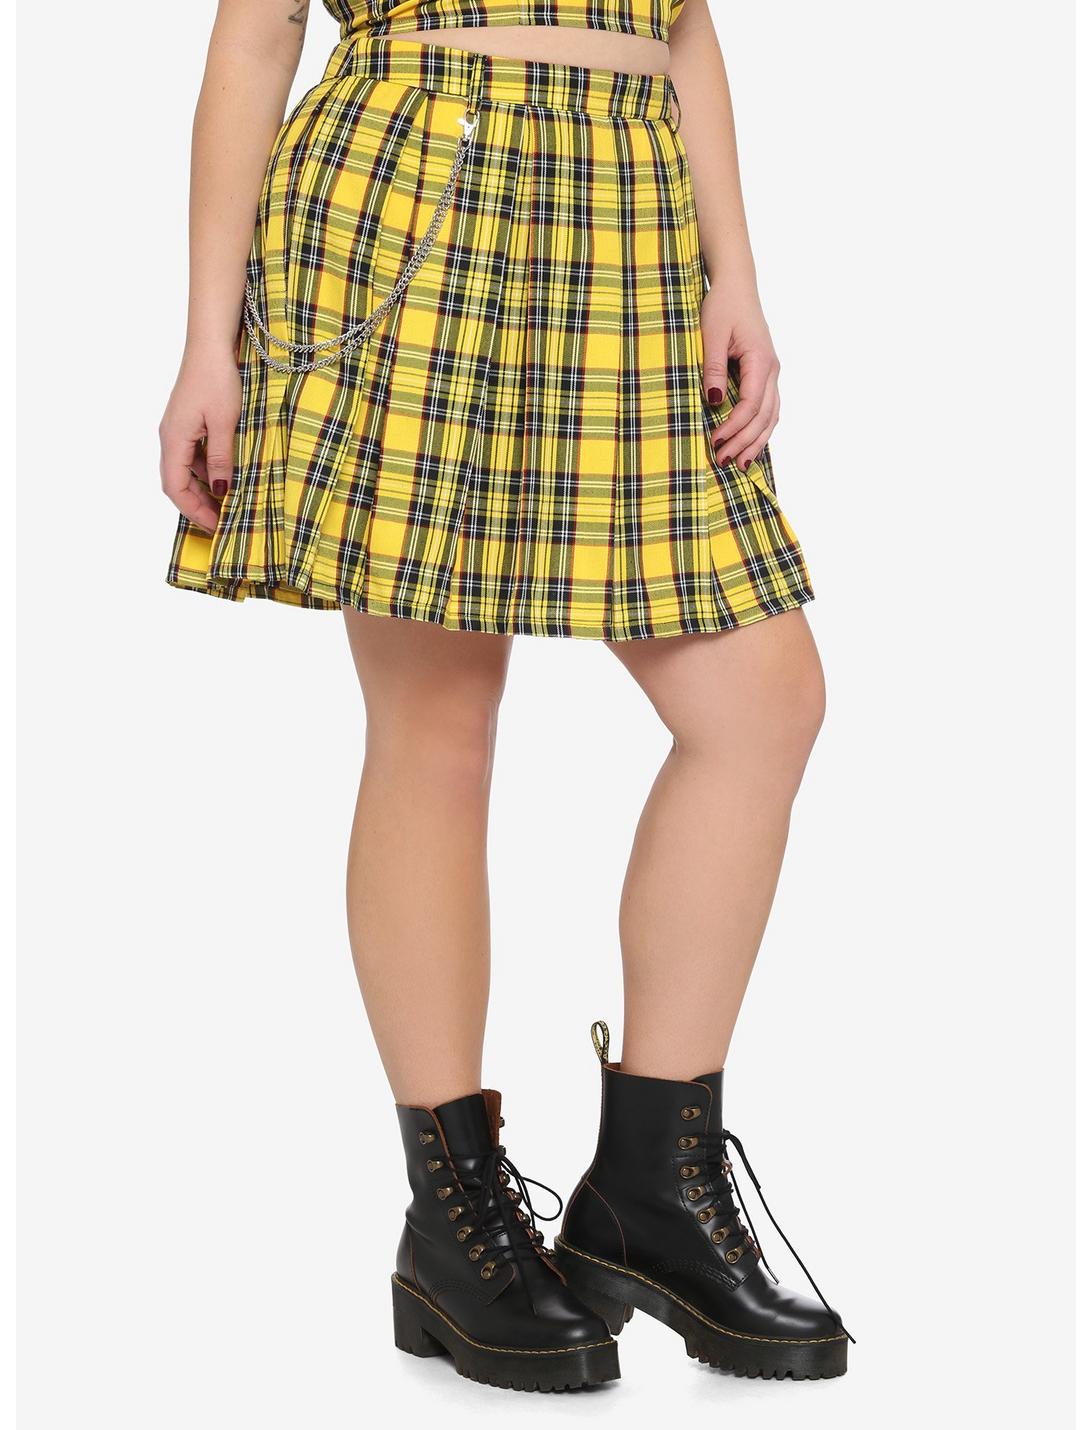 Yellow Plaid Pleated Chain Skirt Plus Size, PLAID - YELLOW, hi-res